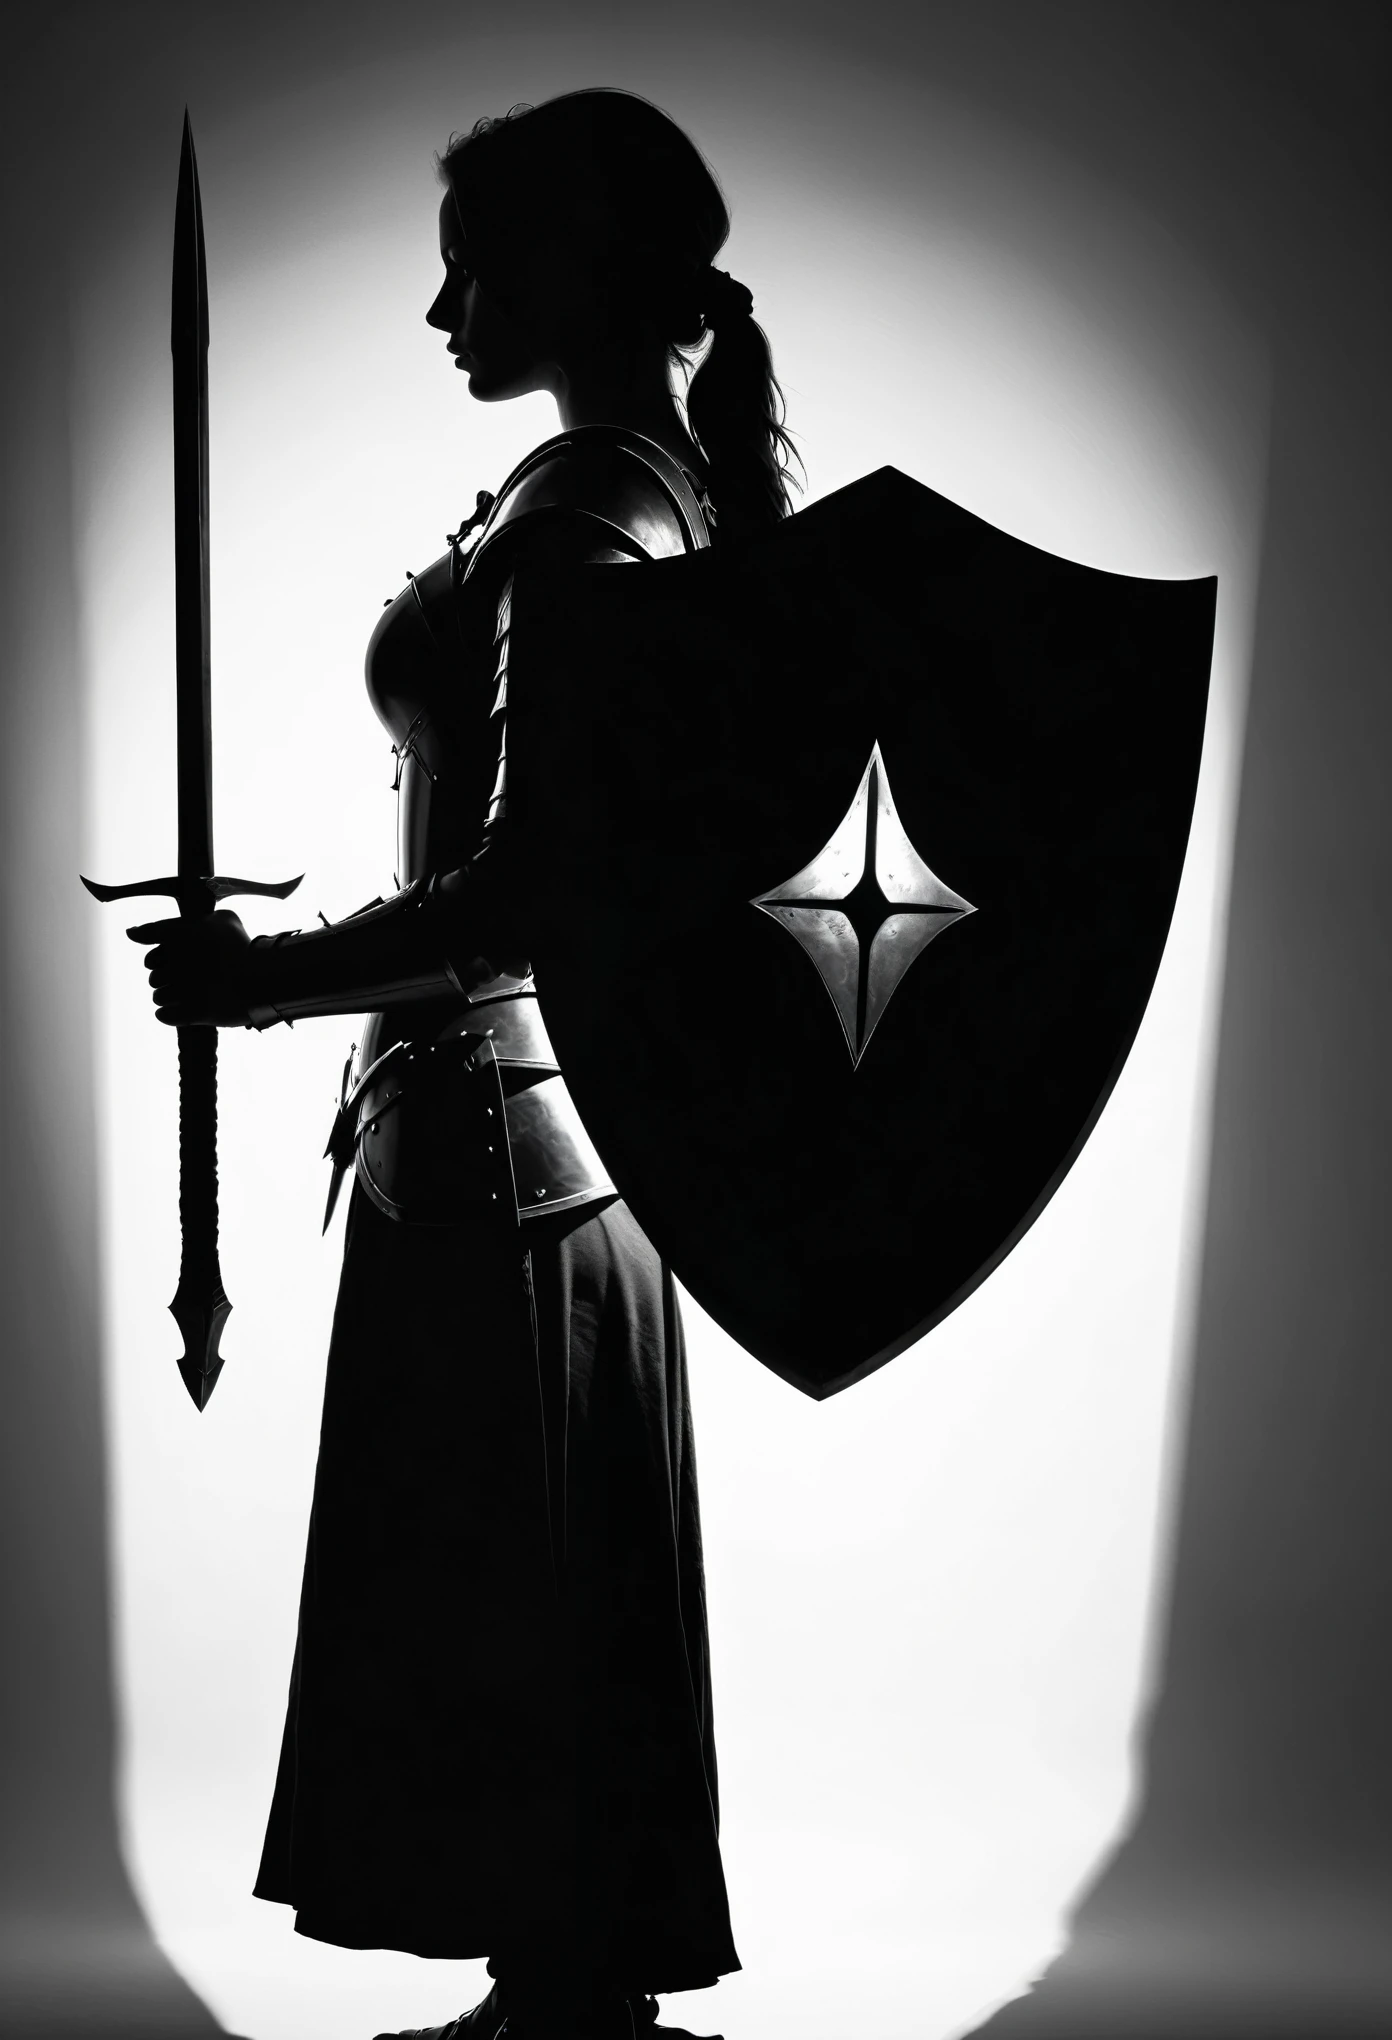 Female Warrior，Silhouette，Medieval style，Holding a shield in one hand，One armed with a spear，Minimalism，Side view，Black and White，monochrome，Grayscale，Chiaroscuro，shadow